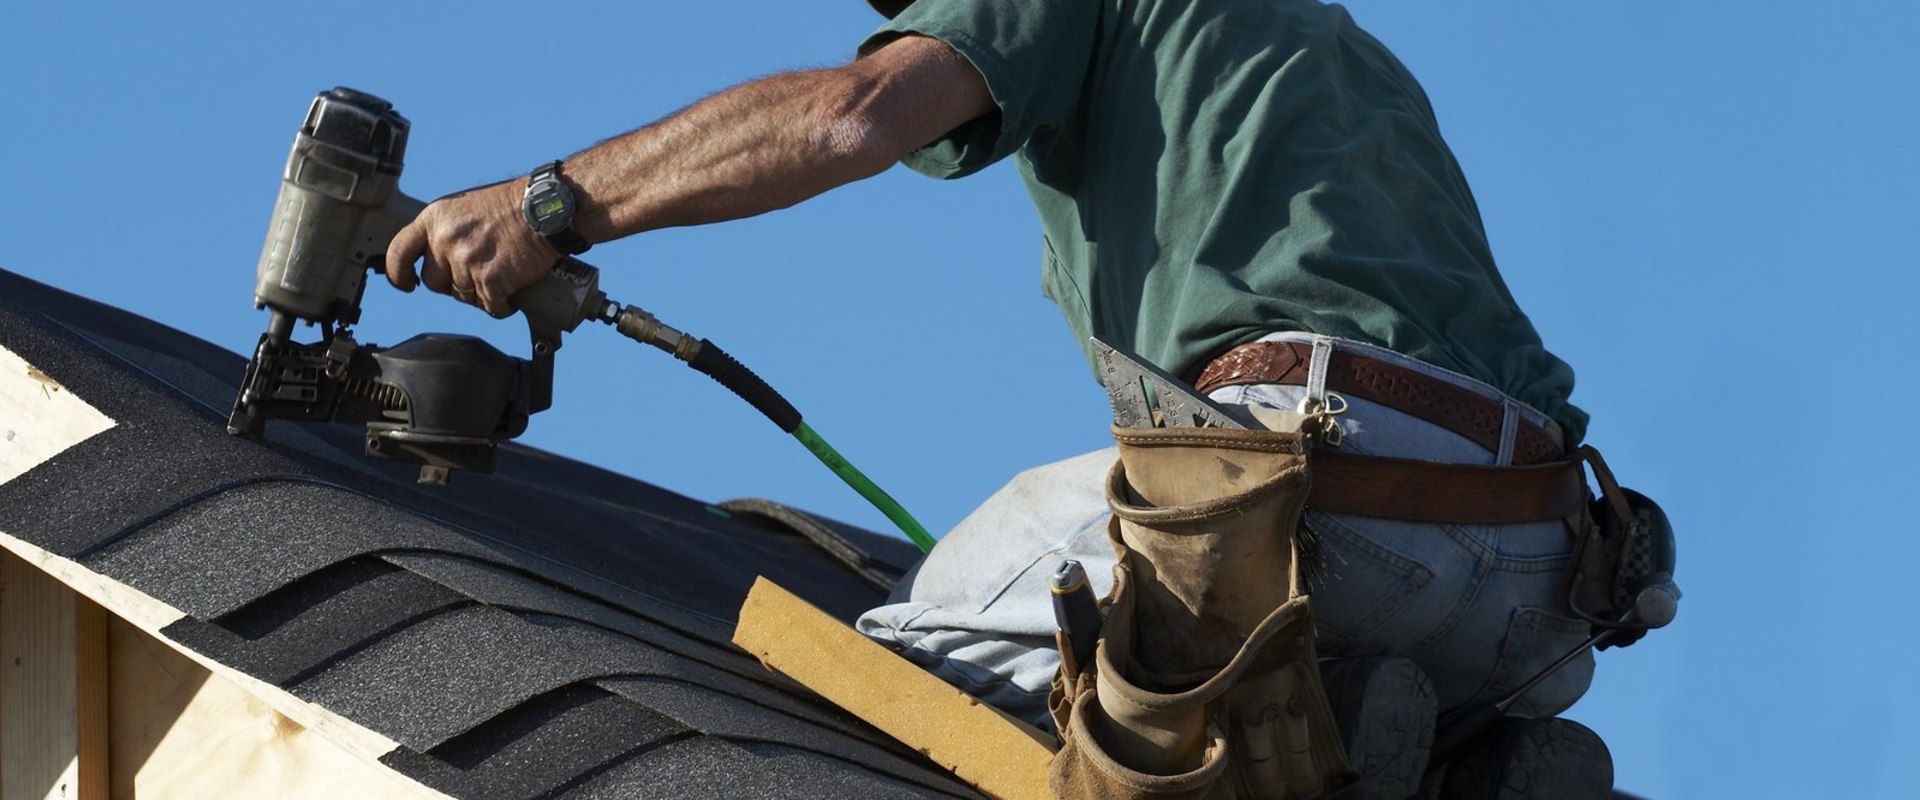 Why You Should Do Roof Repair First Before Conducting A Sebastopol Home Inspection